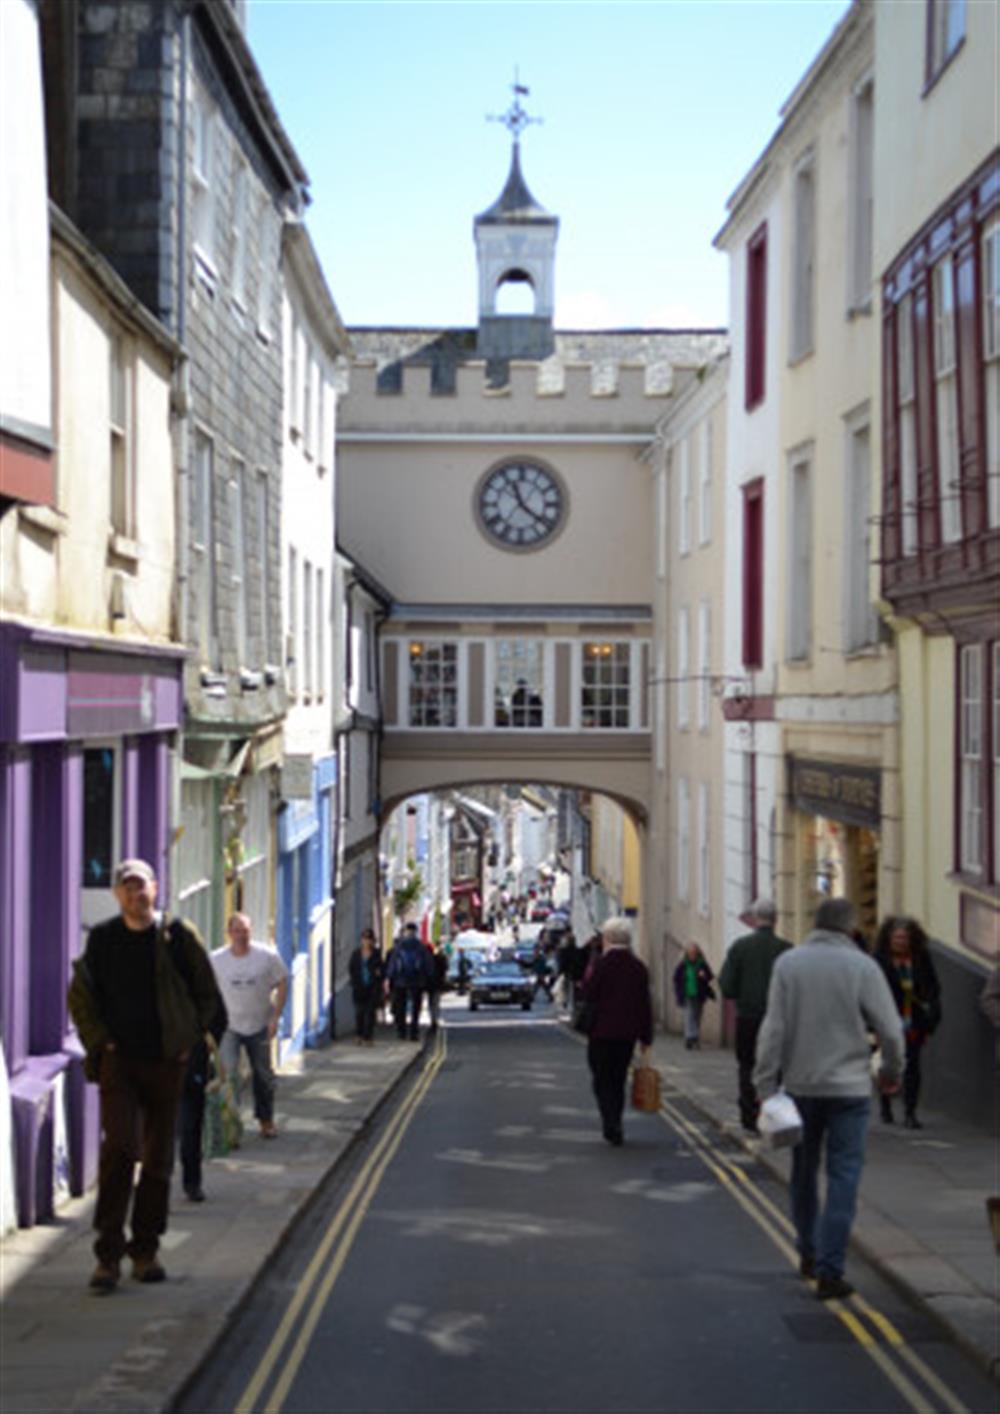 The historic centre of Totnes.